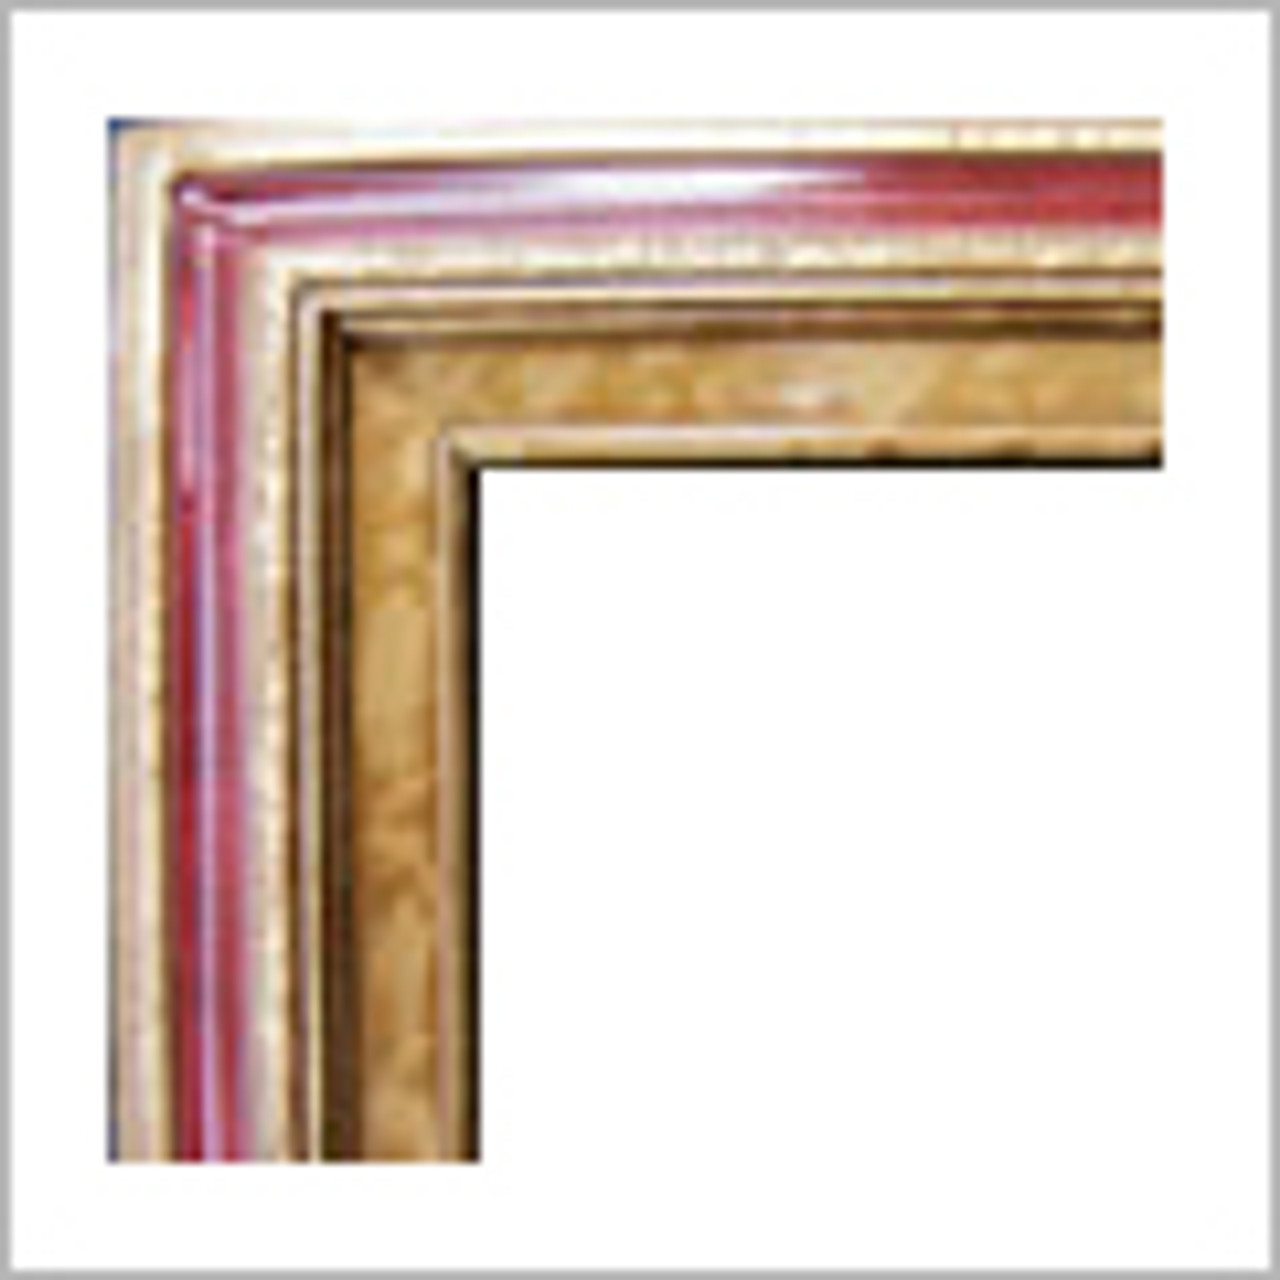  3 Inch Deluxe Wood Frames: 22X22